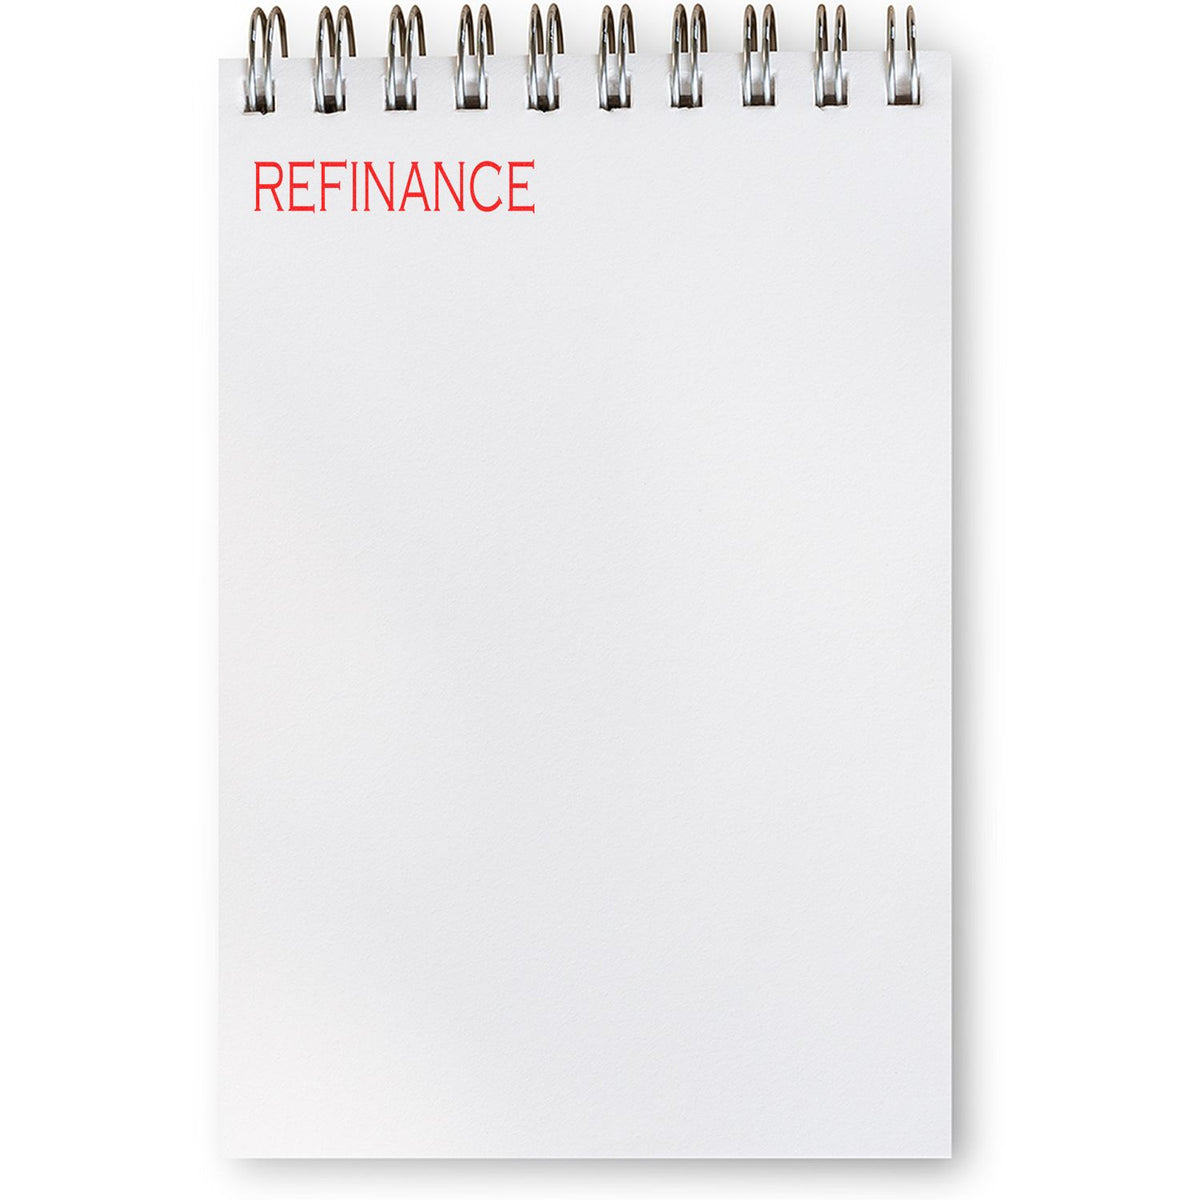 Large Pre-Inked Refinance Stamp In Use Photo